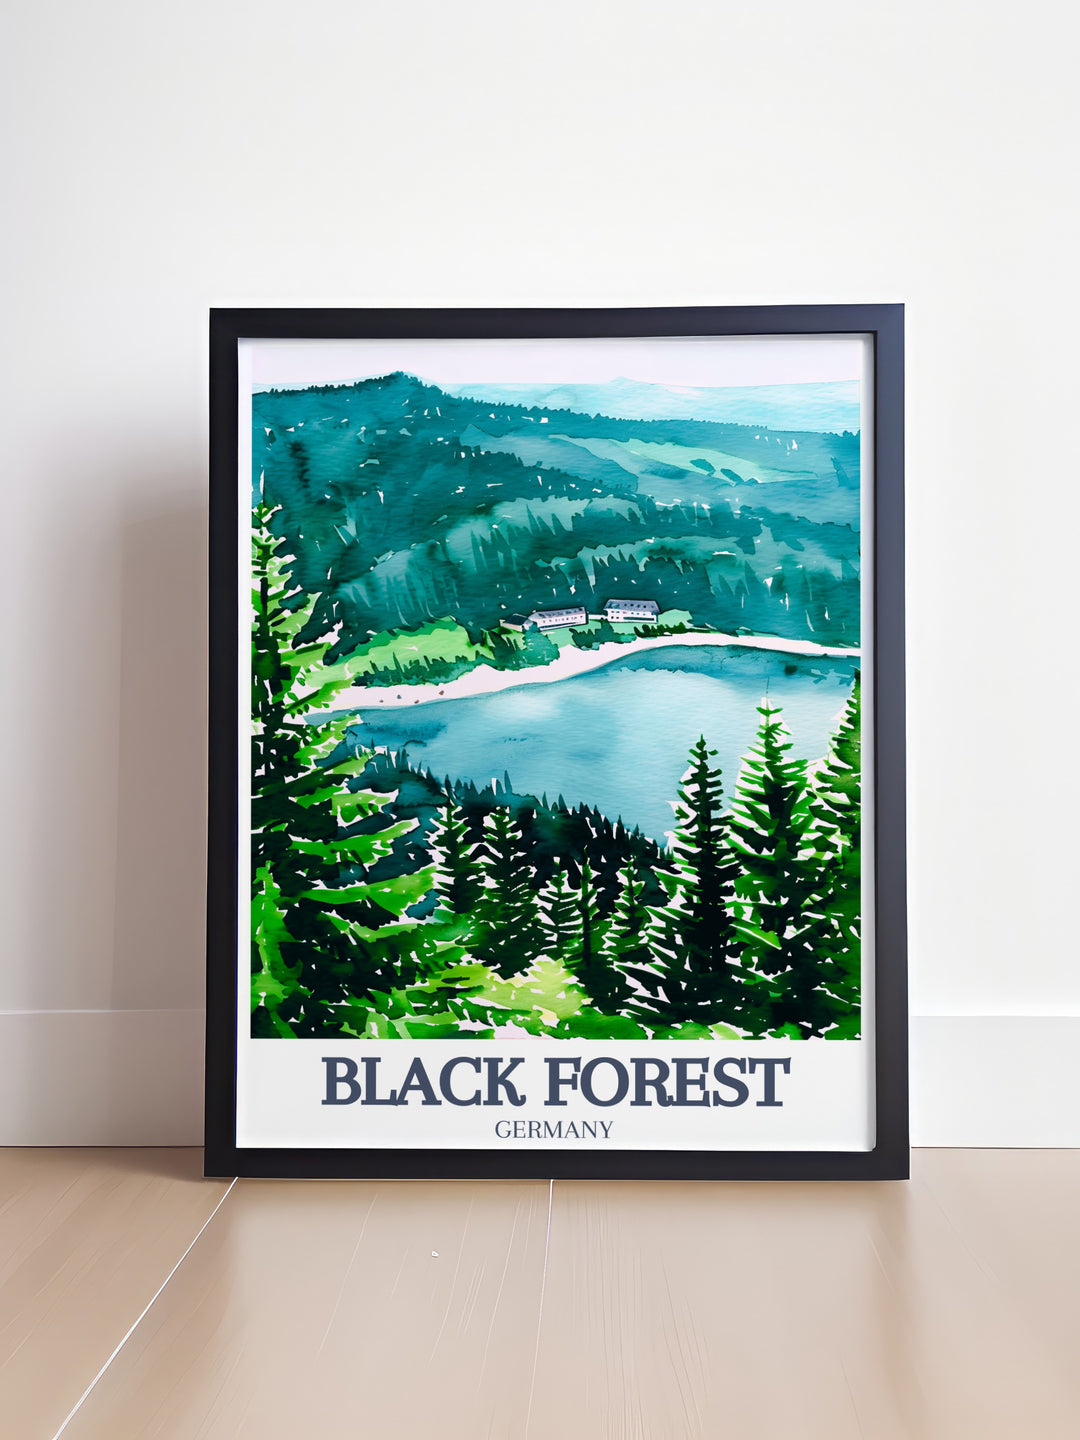 Captivating Black Forest Artwork featuring Mummelsee Lake, Triberg Waterfalls perfect for transforming living spaces into serene retreats the vibrant colors and intricate details make it an ideal choice for those seeking unique German travel prints and forest inspired home decor